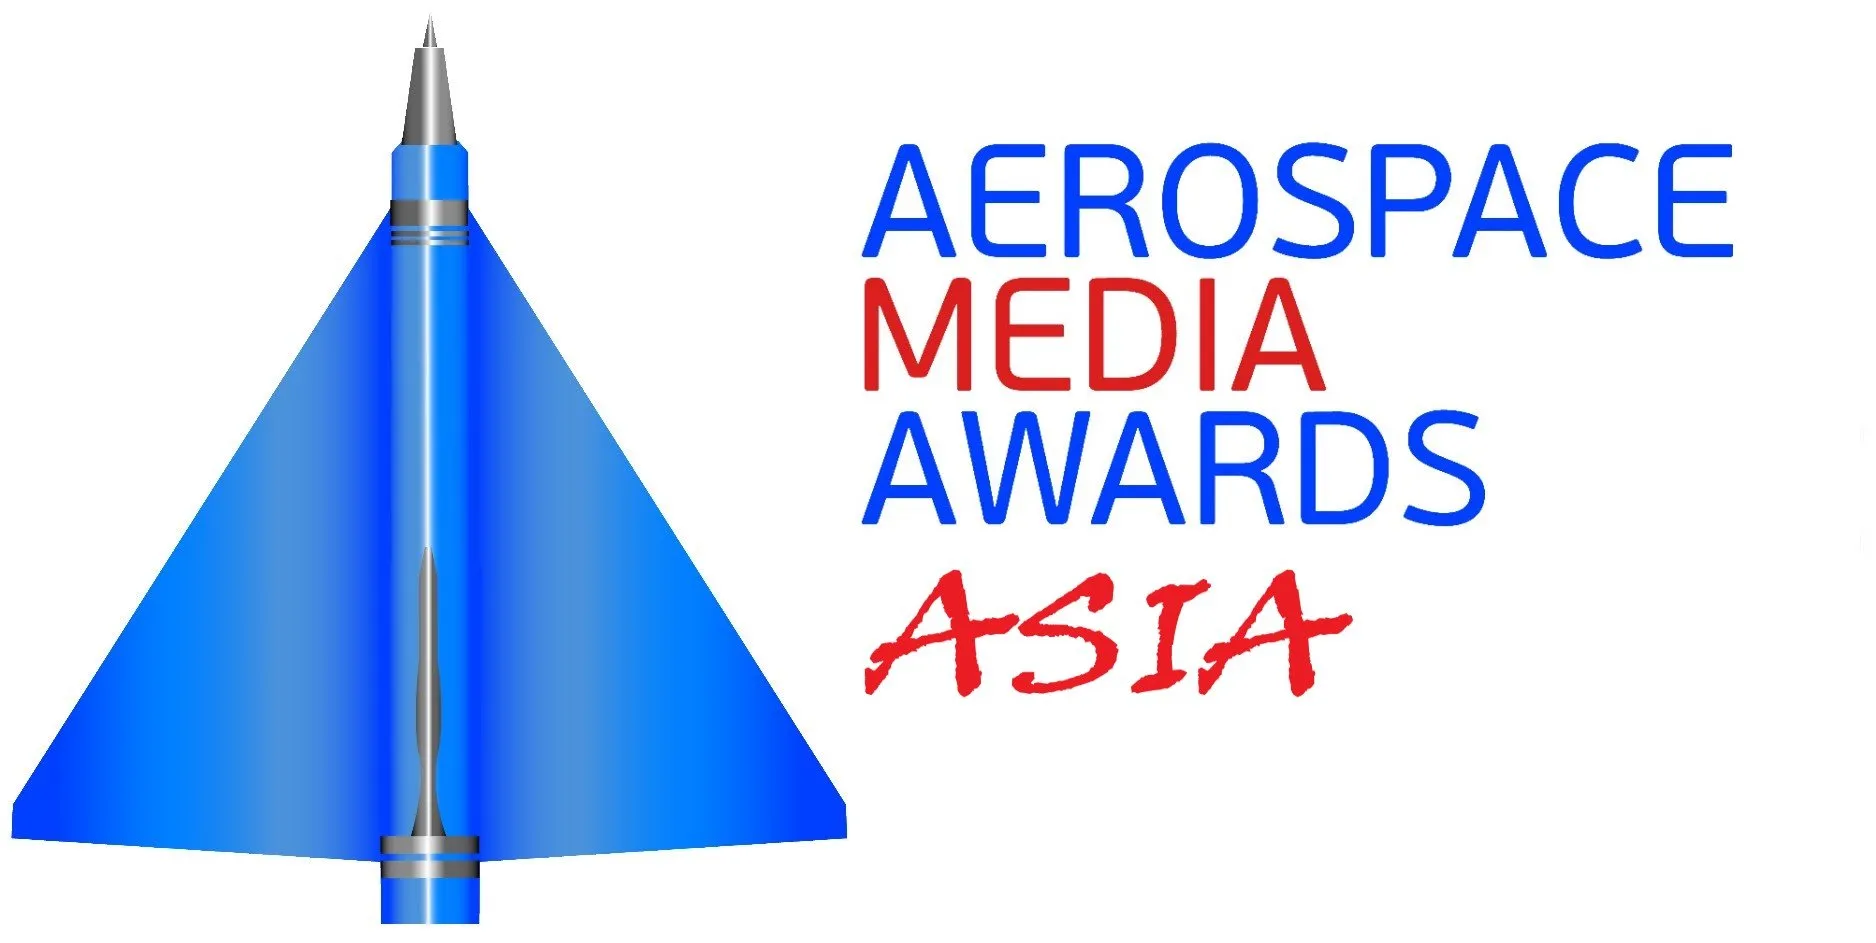 GBP Aerospace & Defence Bags 5 Nominations at 2nd Aerospace Media Awards ASIA